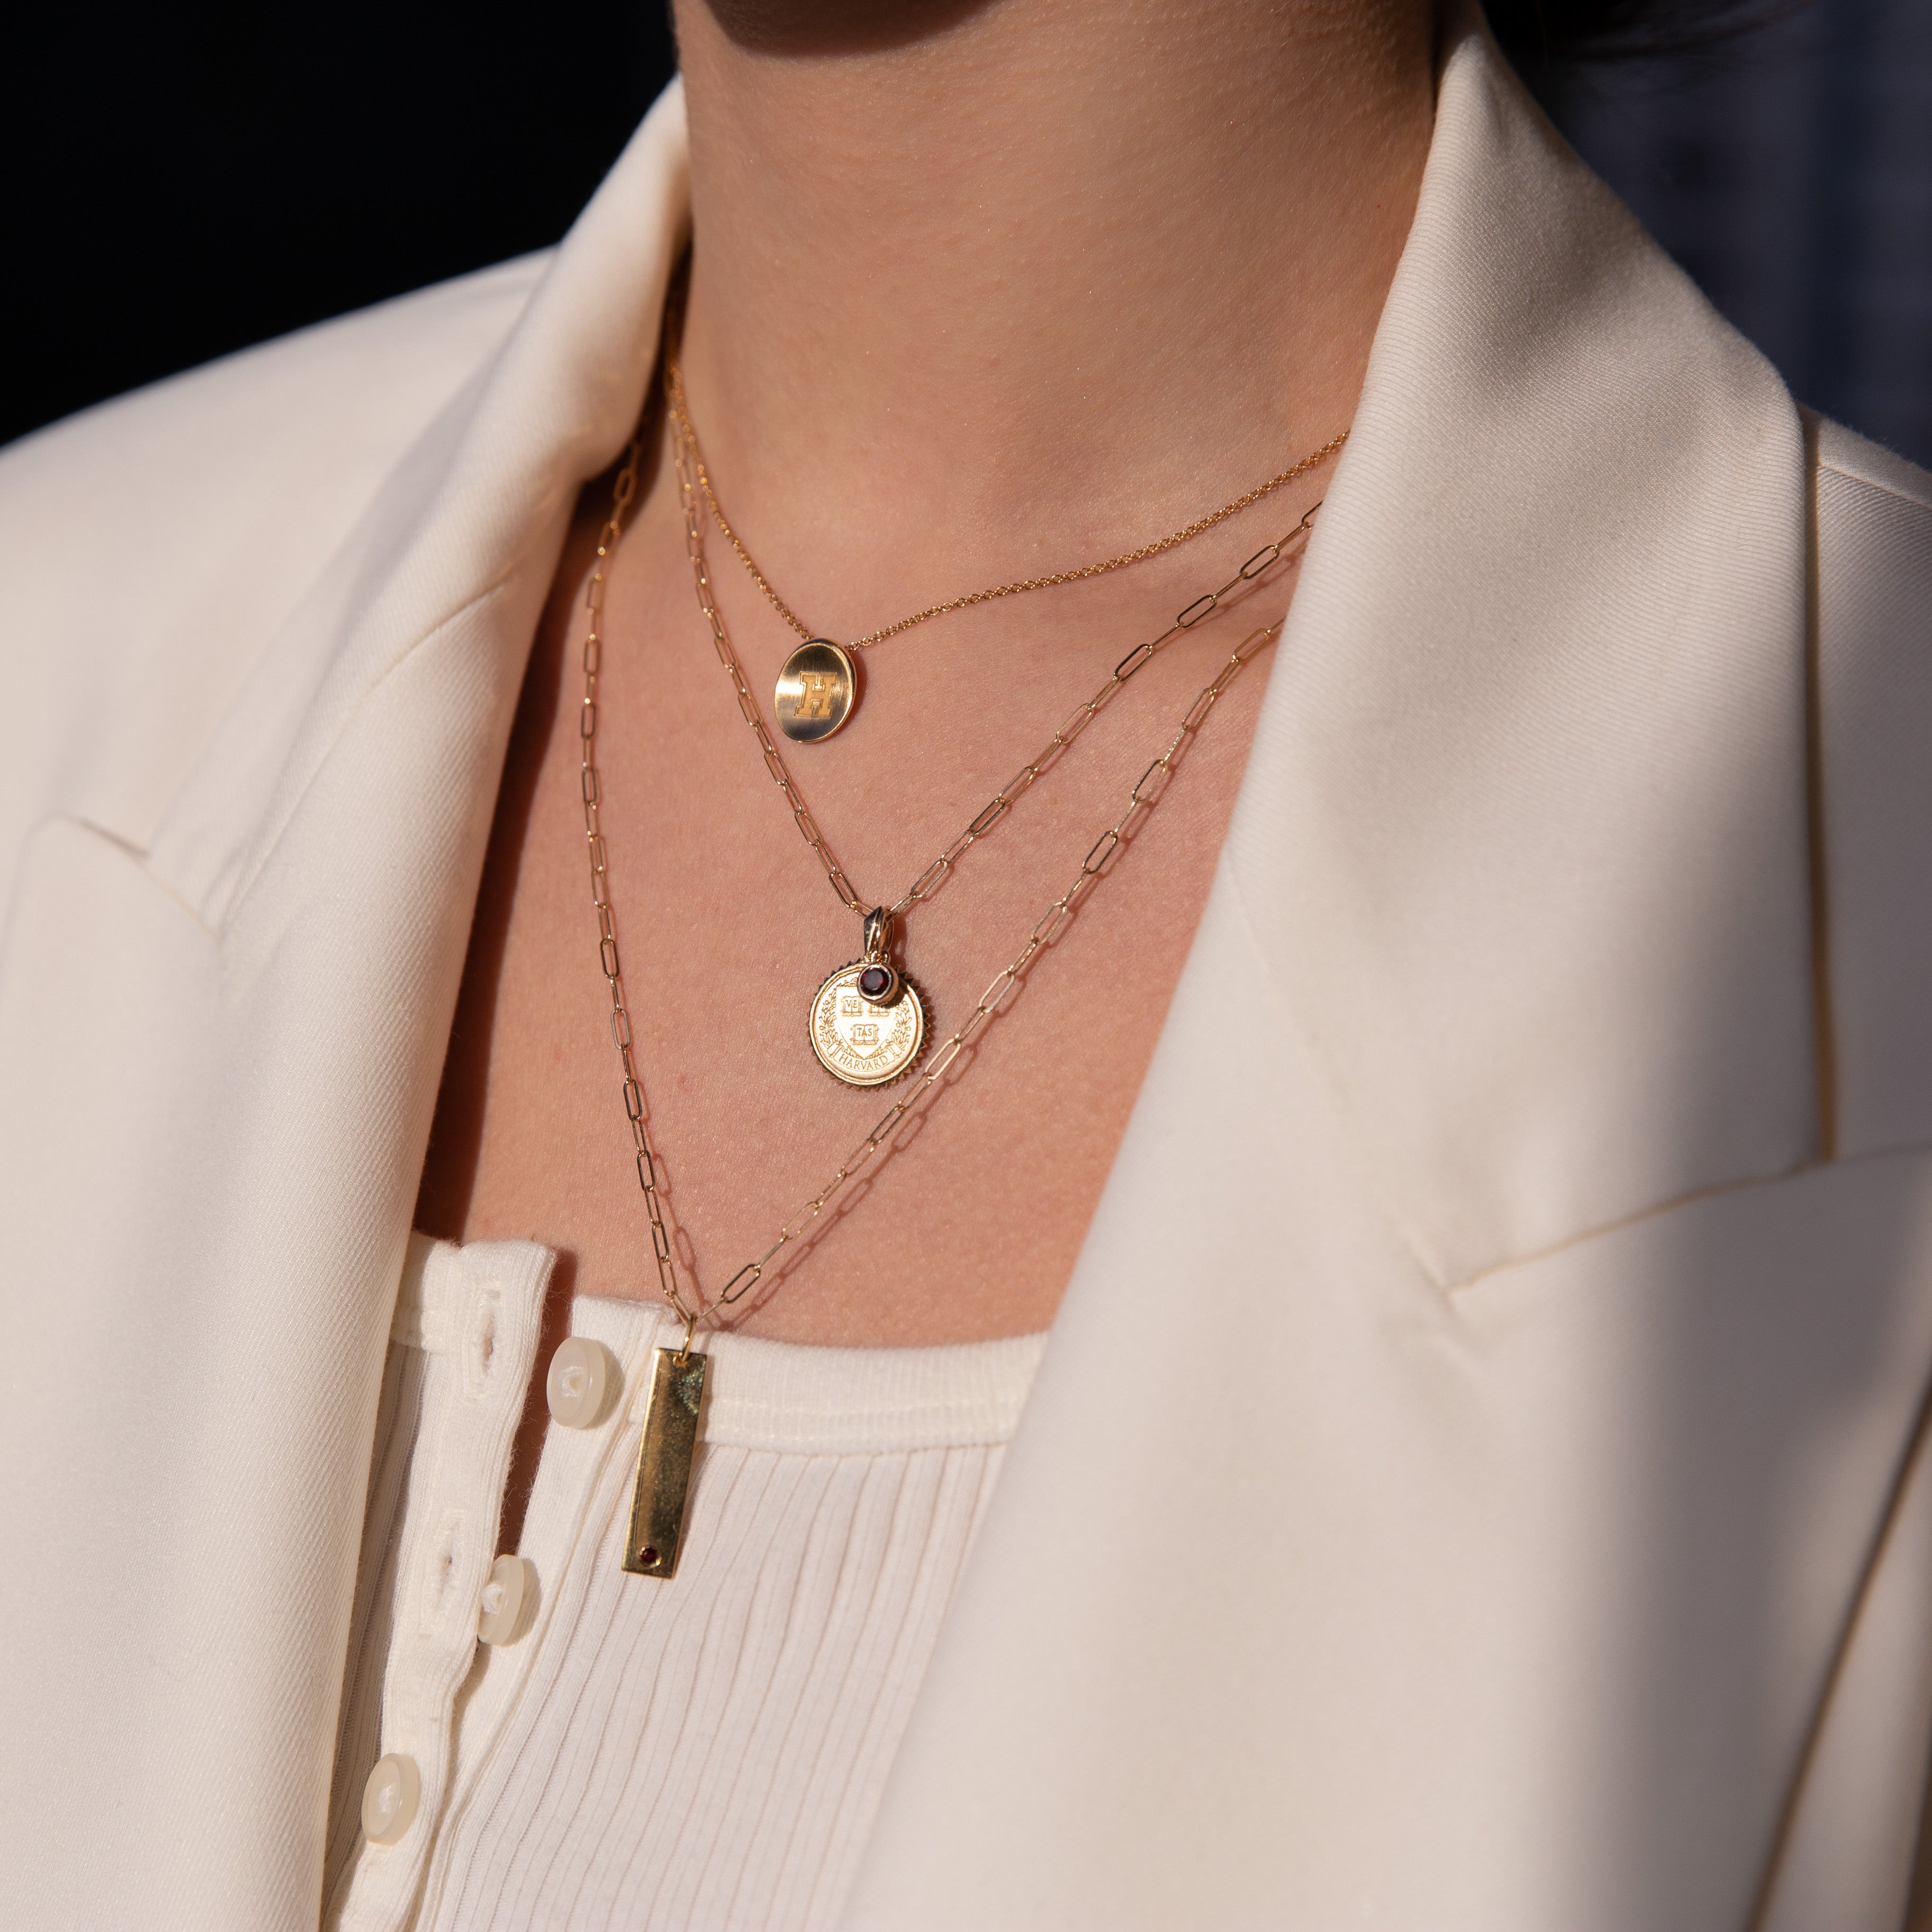 Gold Initial Necklace – Styled By Josh